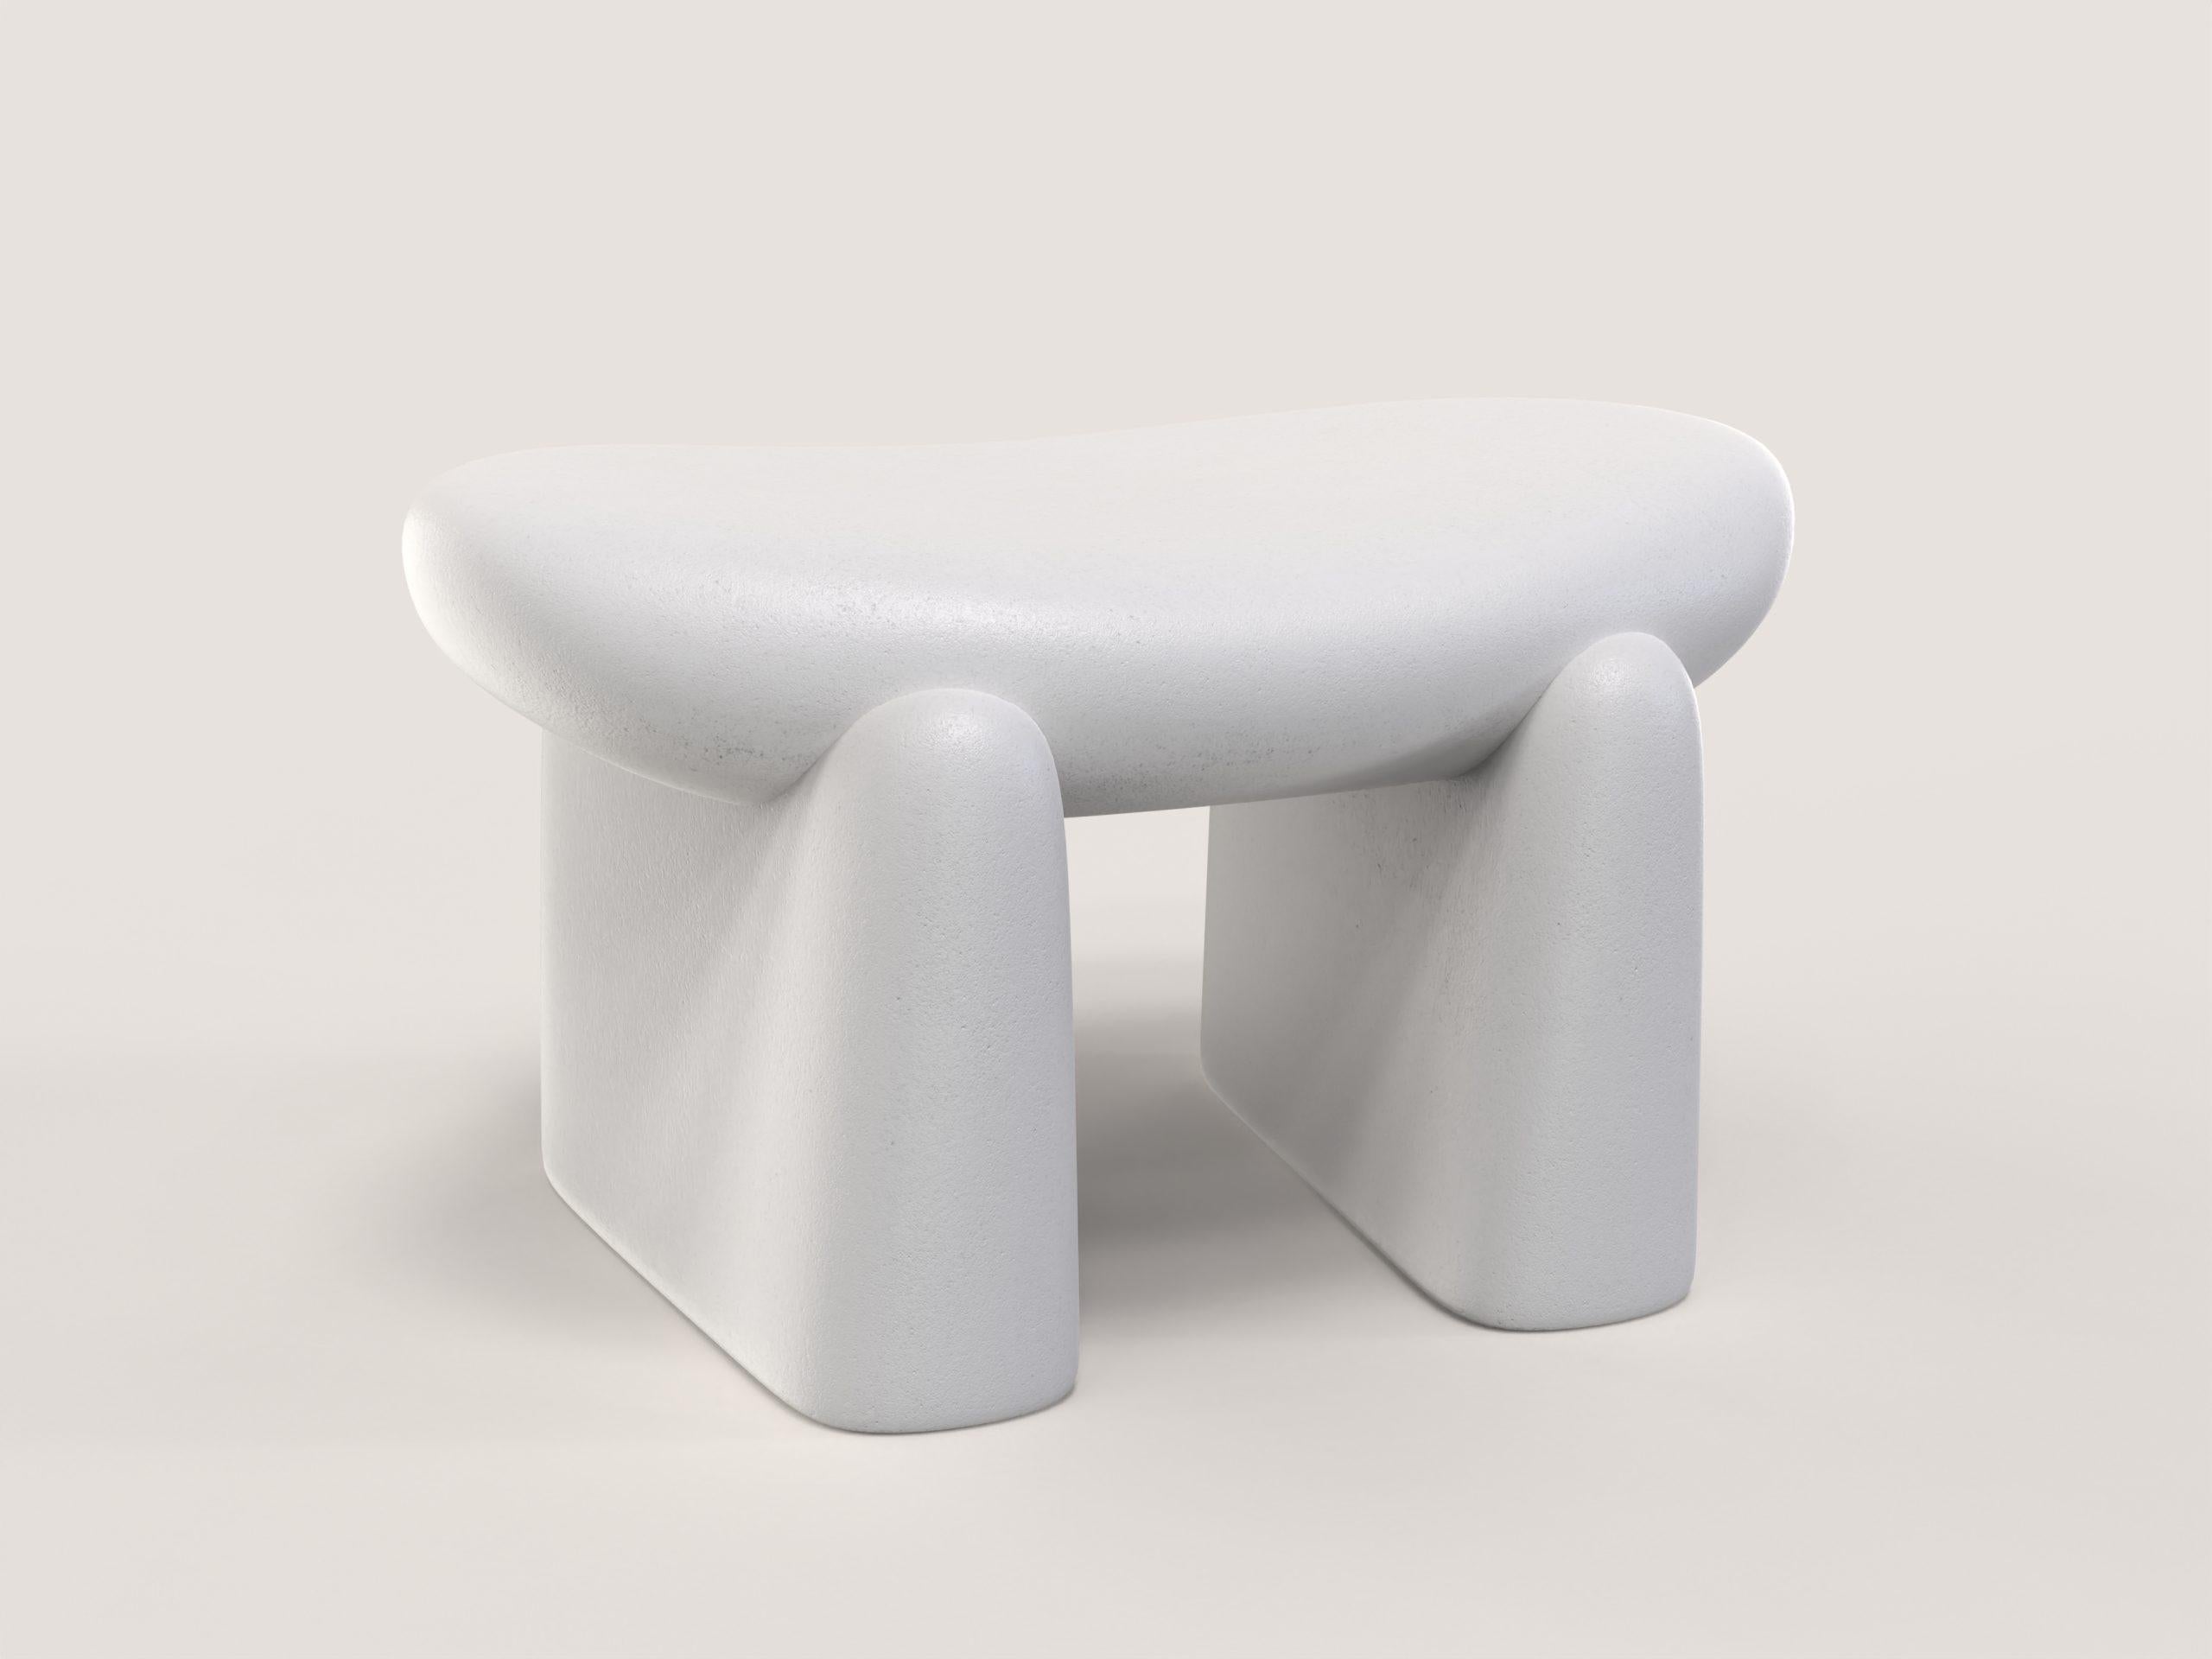 Pau V2 low table by Edizione Limitata
Limited Edition of 150 pieces. Signed and numbered.
Dimensions: D 50 x W 70 x H 41 cm.
Materials: Resin-coated polistyrene.

Edizione Limitata, that is to say “Limited Edition”, is a brand promoting and